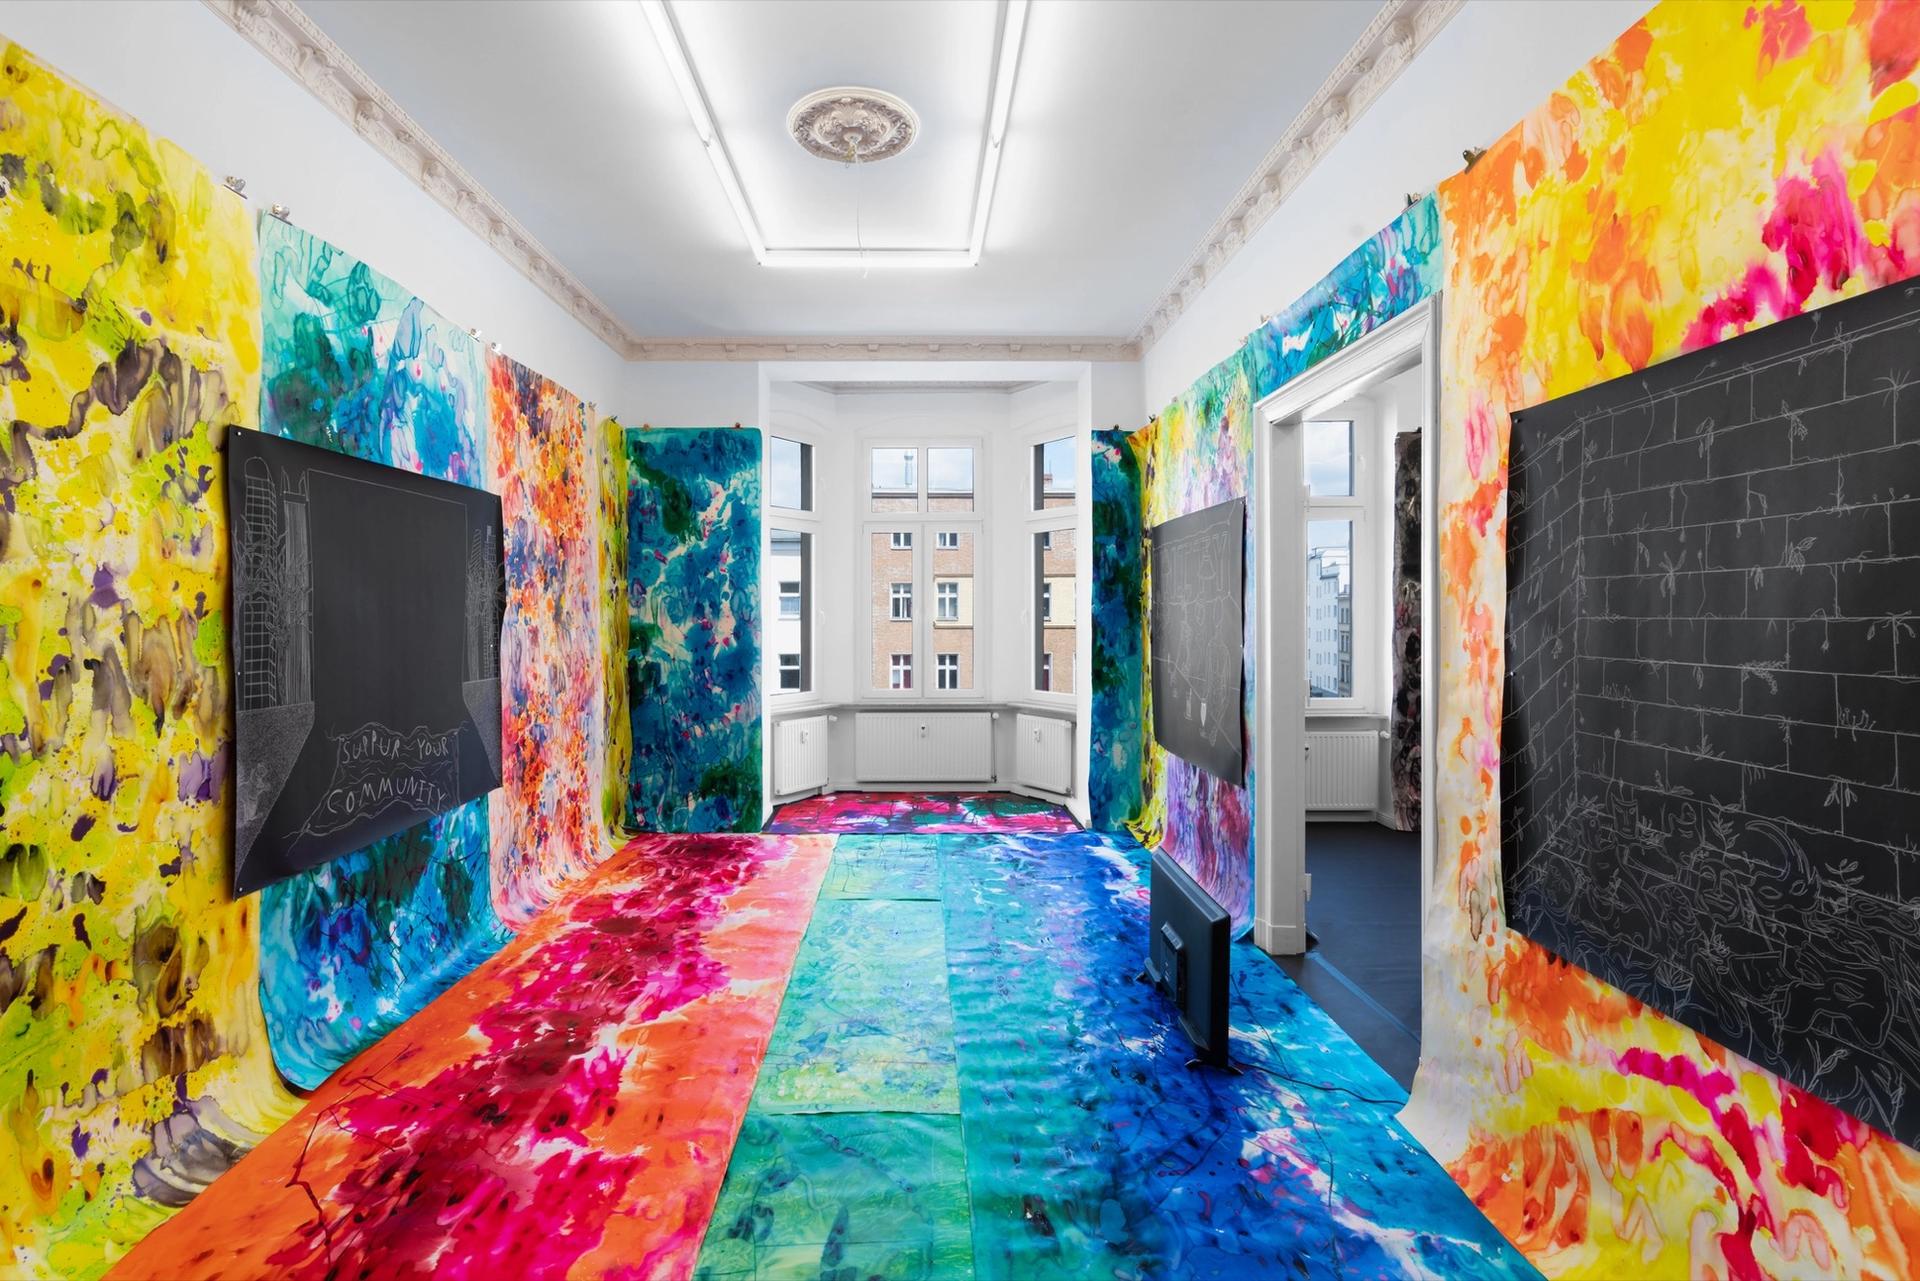 Gaby Sahhar, Second Home, 2019. Installation view. Courtesy of Sweetwater Berlin. Photo: graysc.de